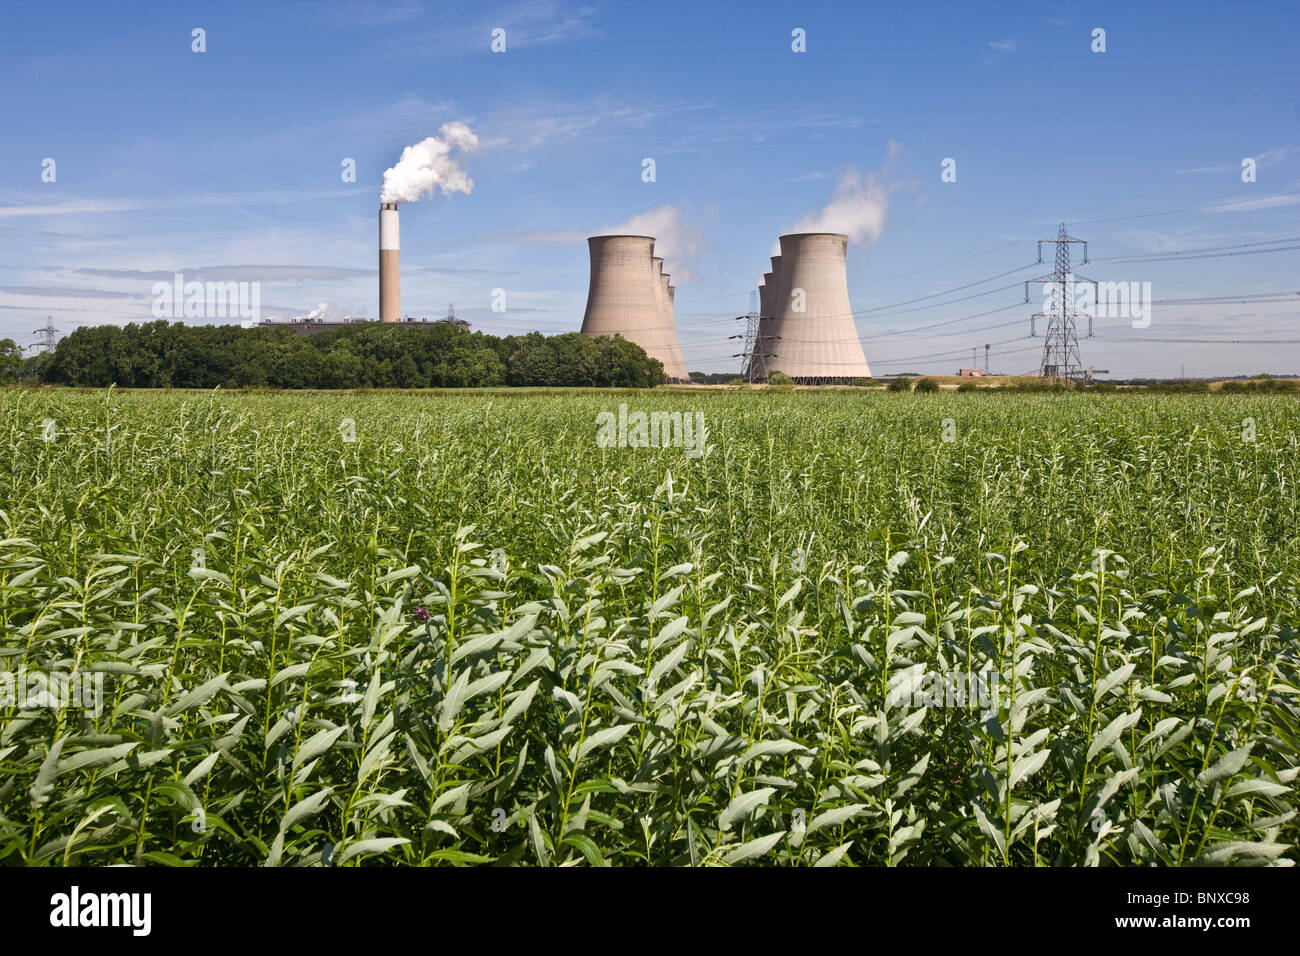 Willow being grown for use as fuel with Cottam Power Station In The Background,Nottinghamshire,England Stock Photo